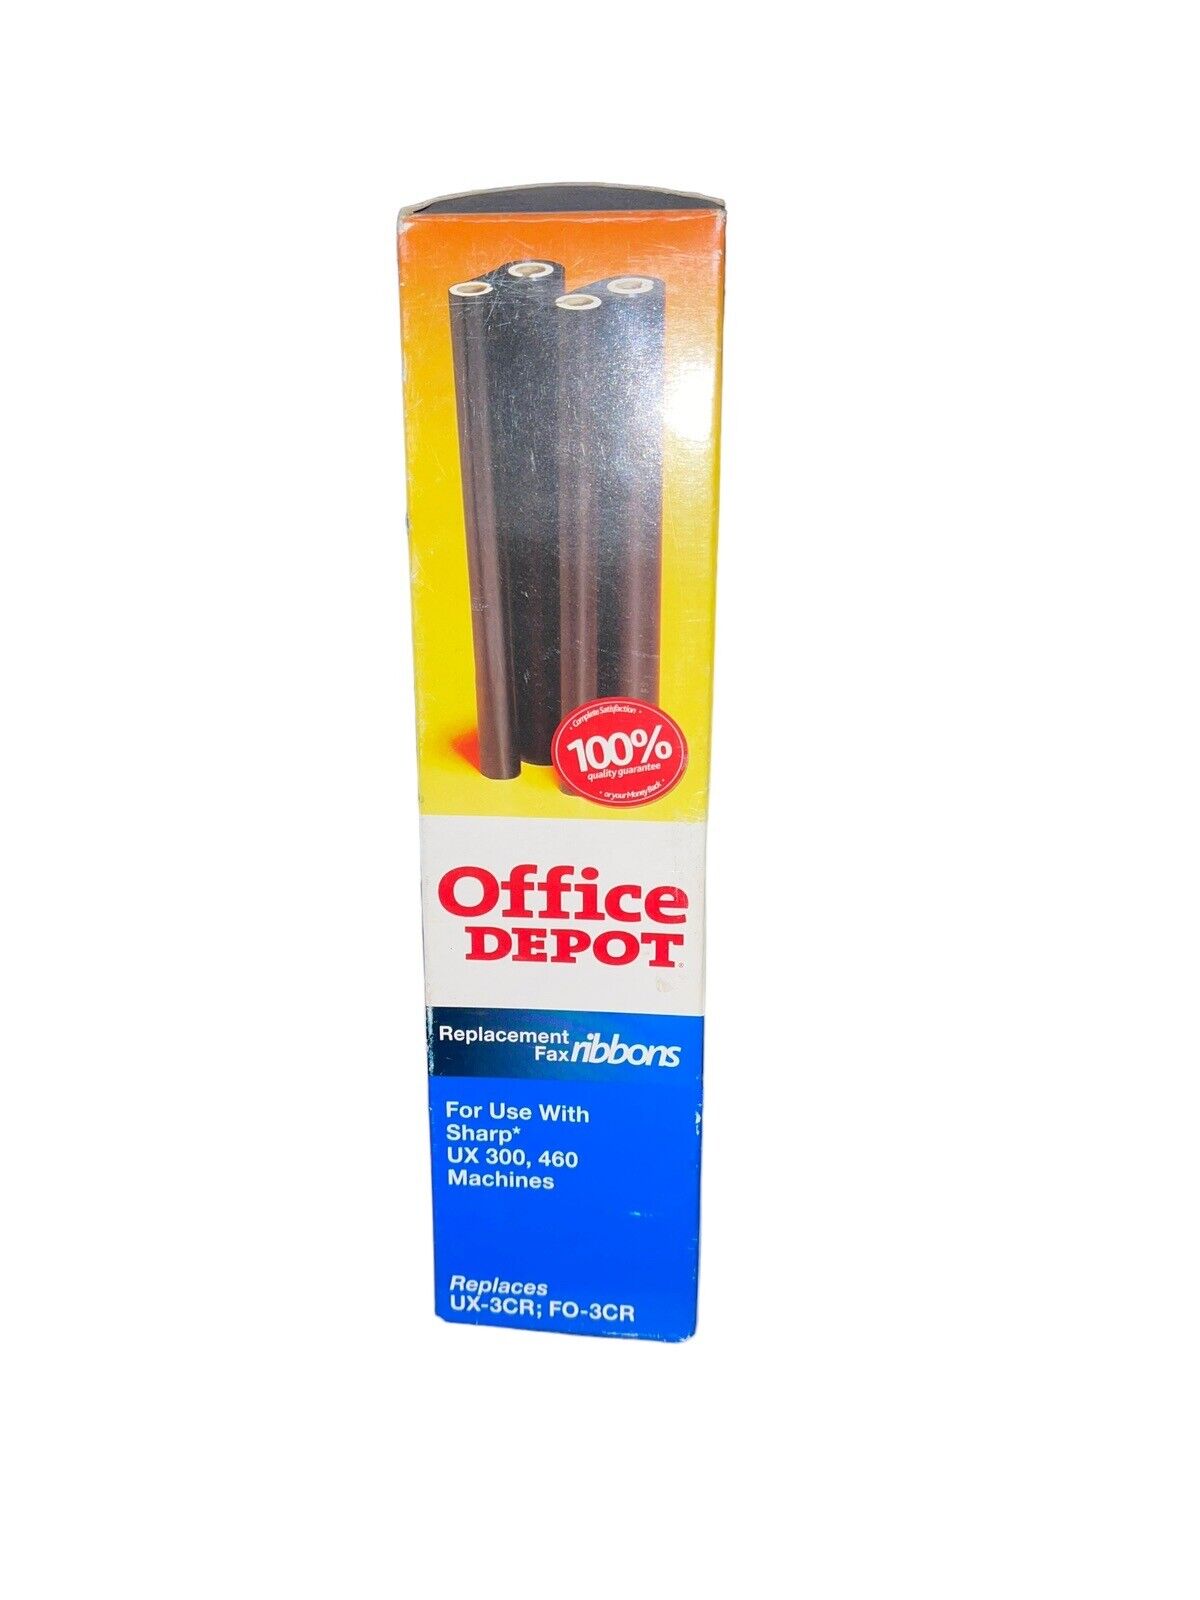 OFFICE DEPOT BLACK REPLACEMENT FAX RIBBONS **Open Box**